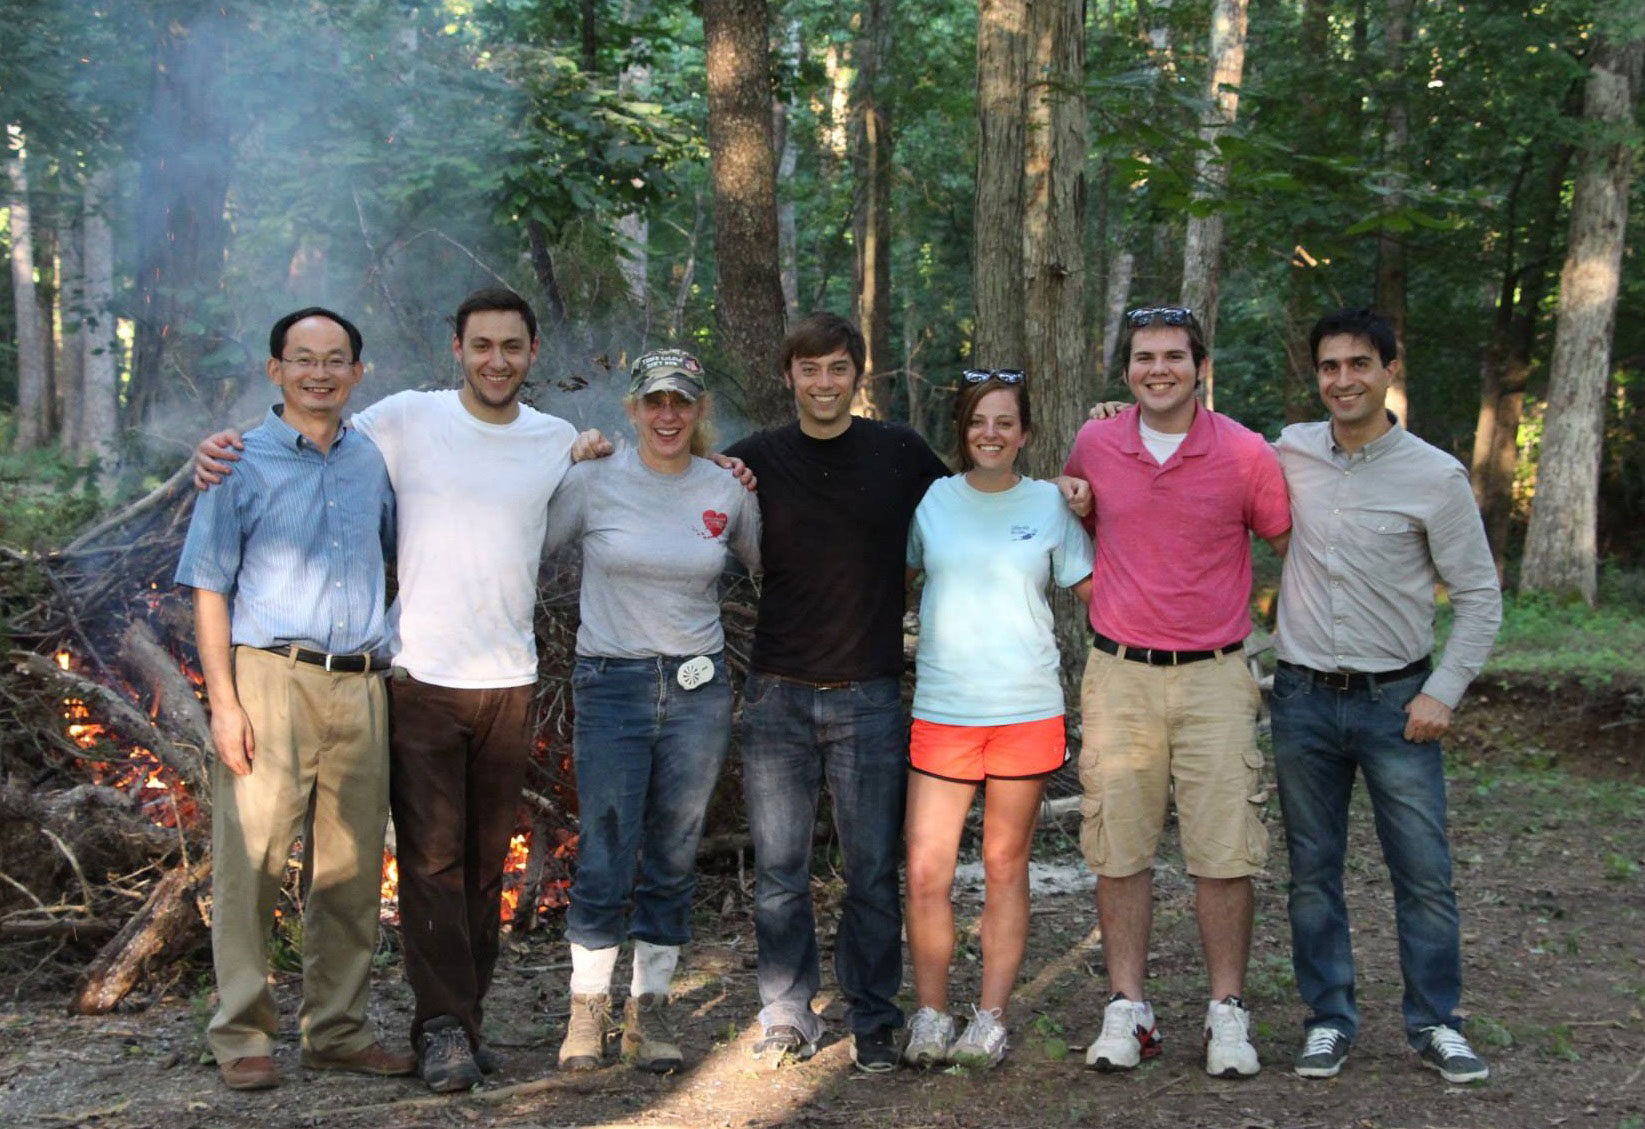 Interns and faculty enjoying the outdoors